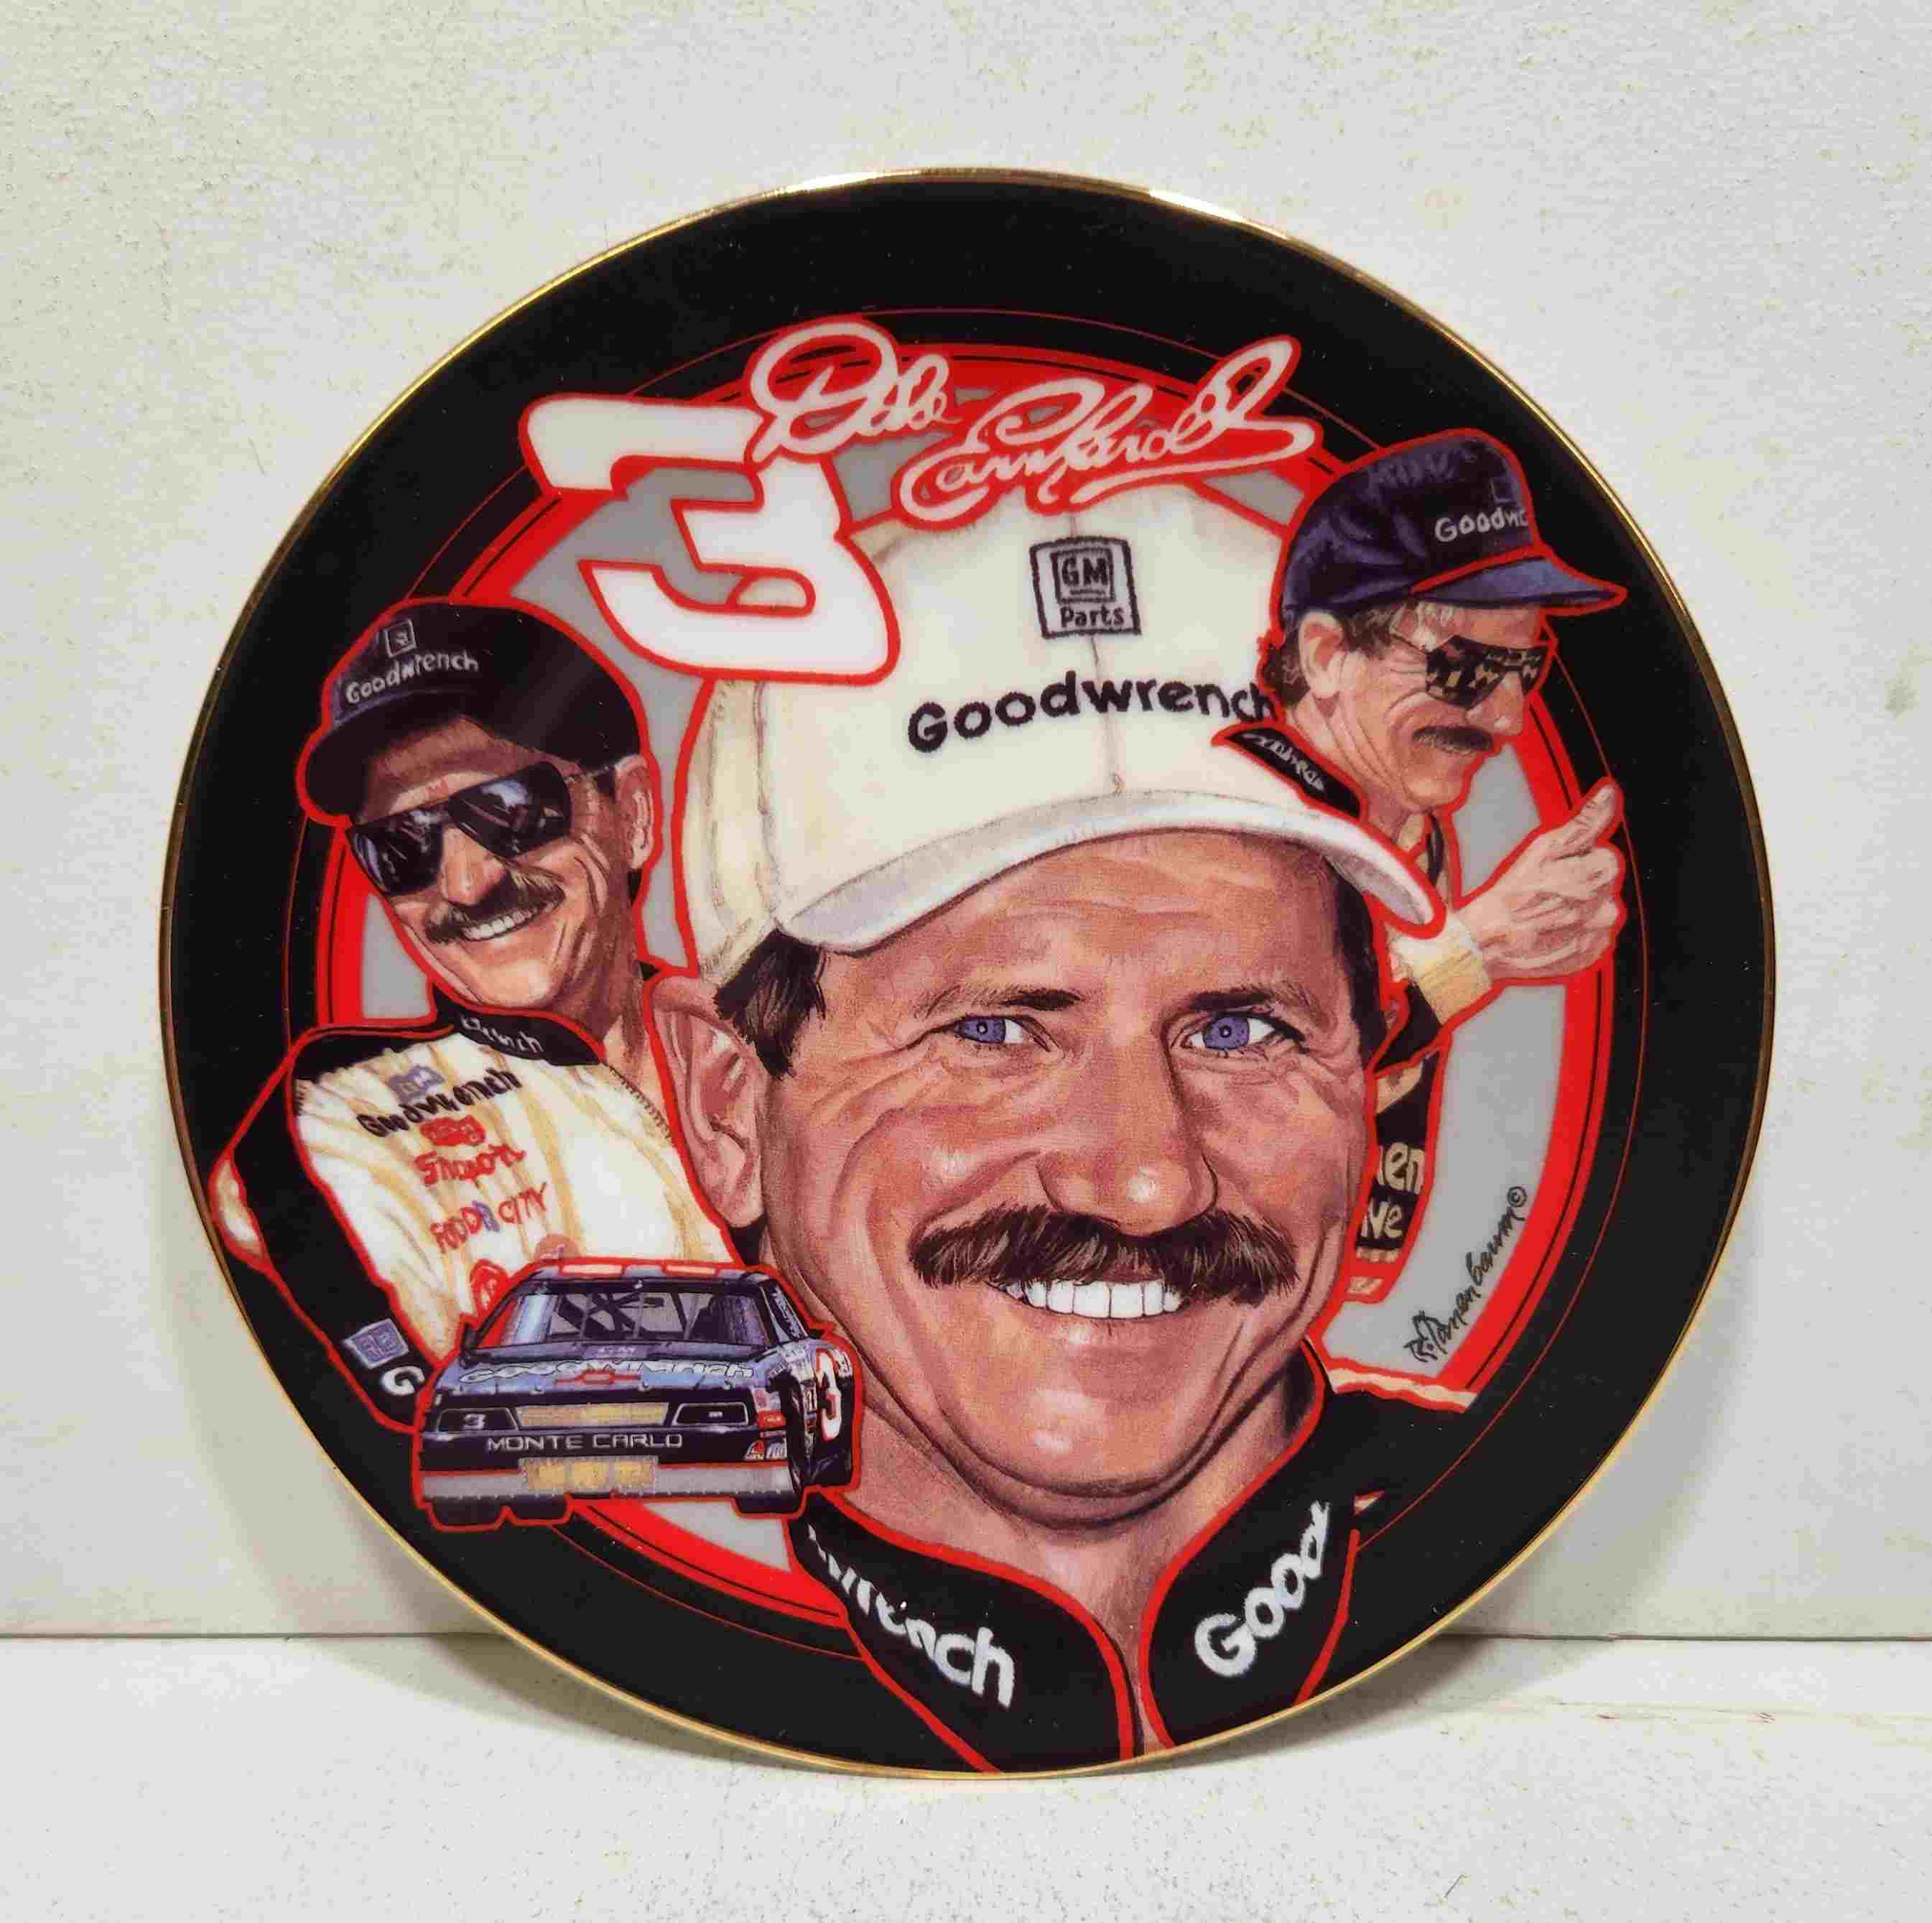 2001 Dale Earnhardt Collector Plate "The Man in Black" by The Hamilton Collection